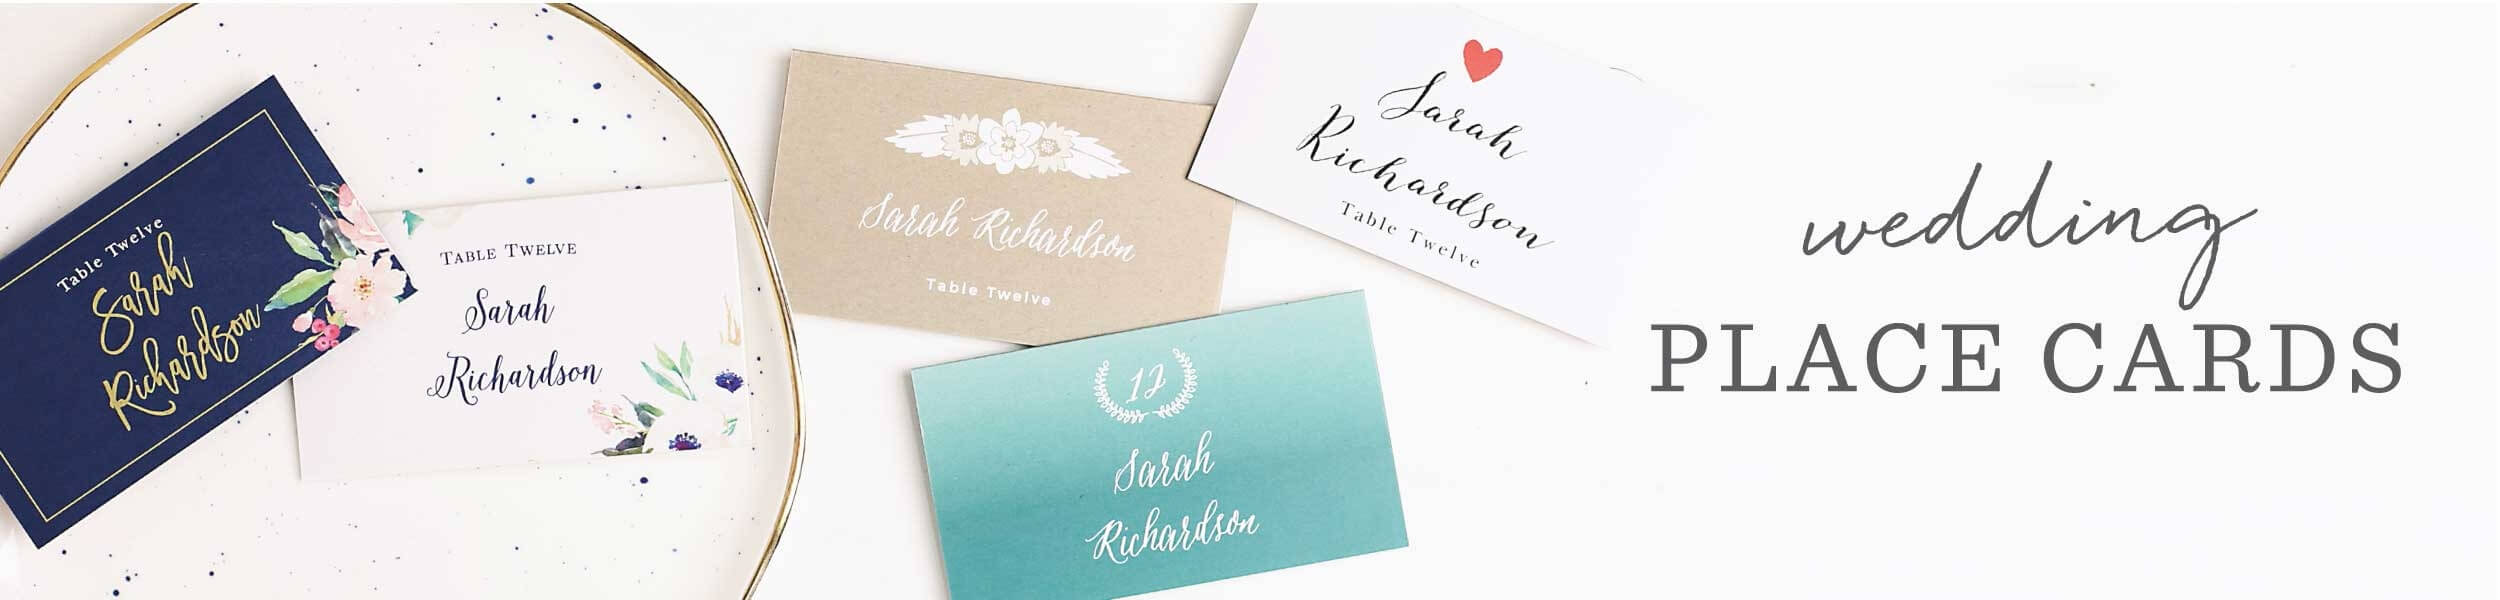 Redwood Forest Place Cards With Wedding Place Card Template Free Word